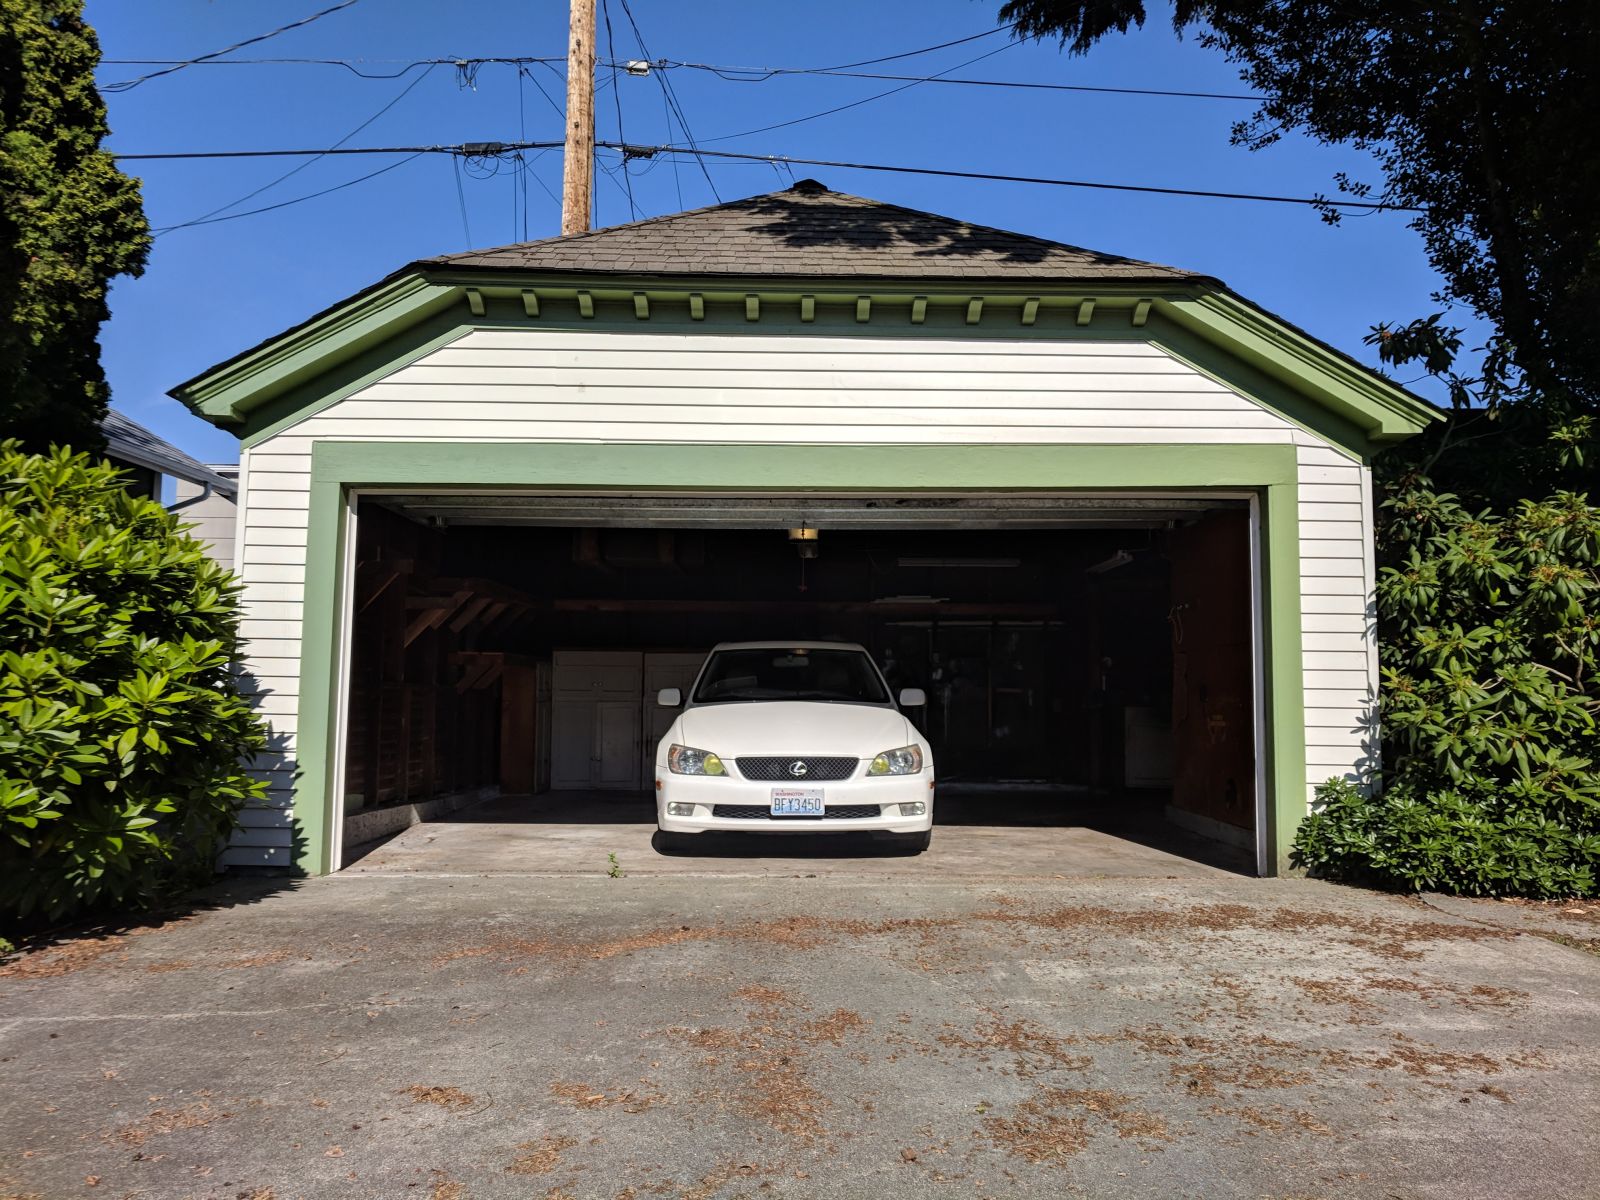 Illustration for article titled As of 3:48 PDT today, I am the humbled owner of a 2-car garage.